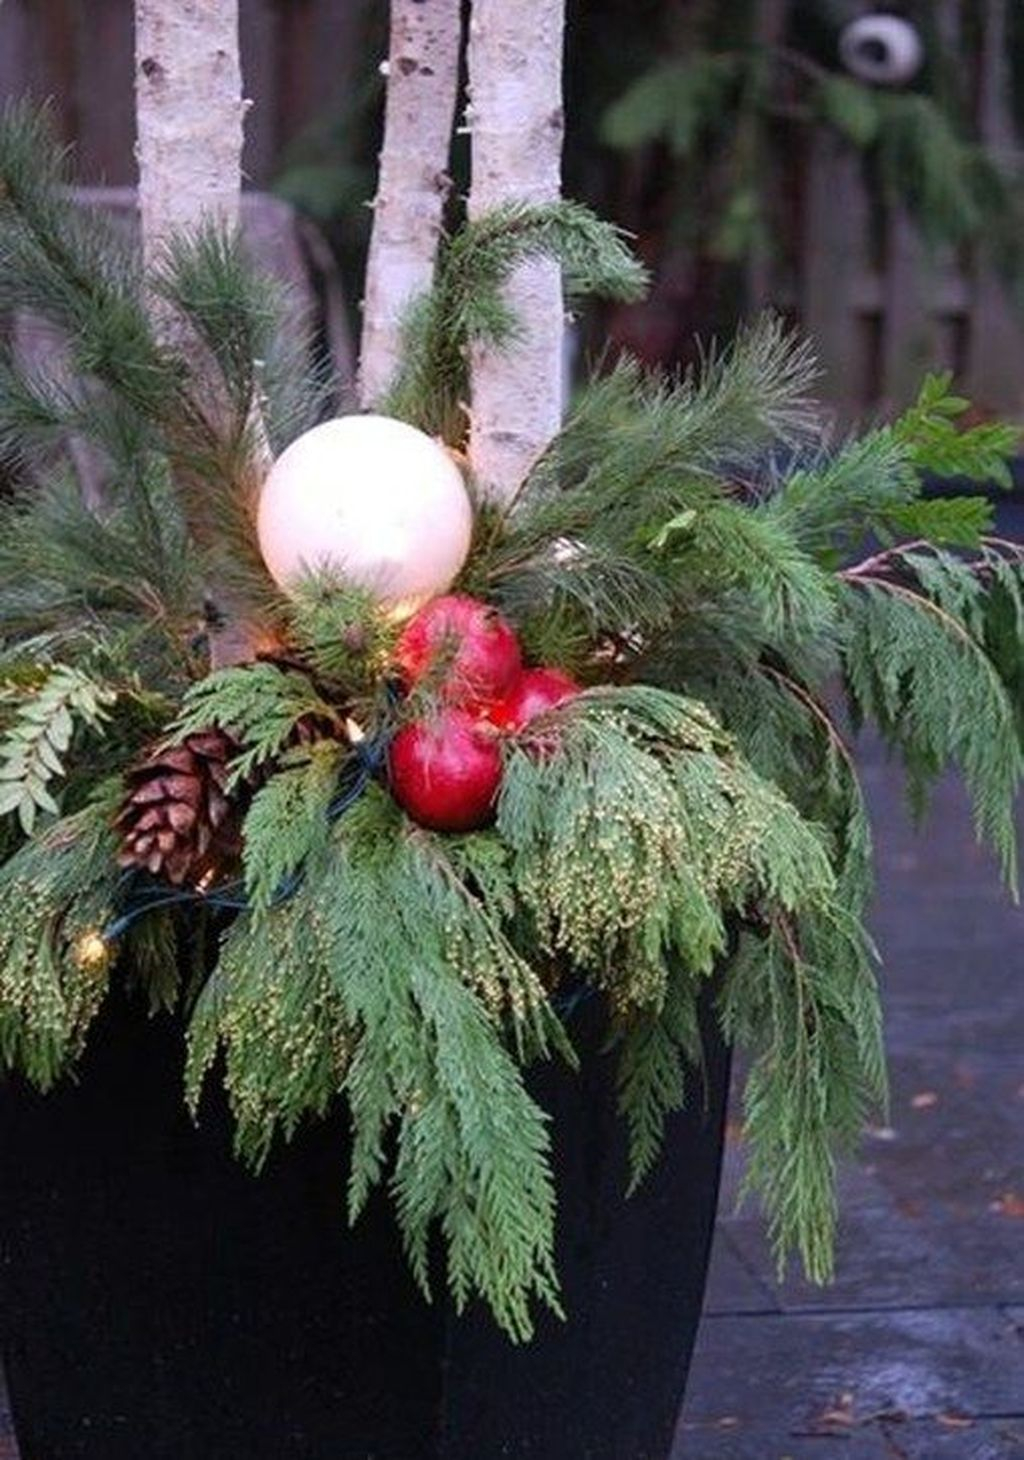 Marvelous Outdoor Holiday Planter Ideas To Beauty Porch Décor 36